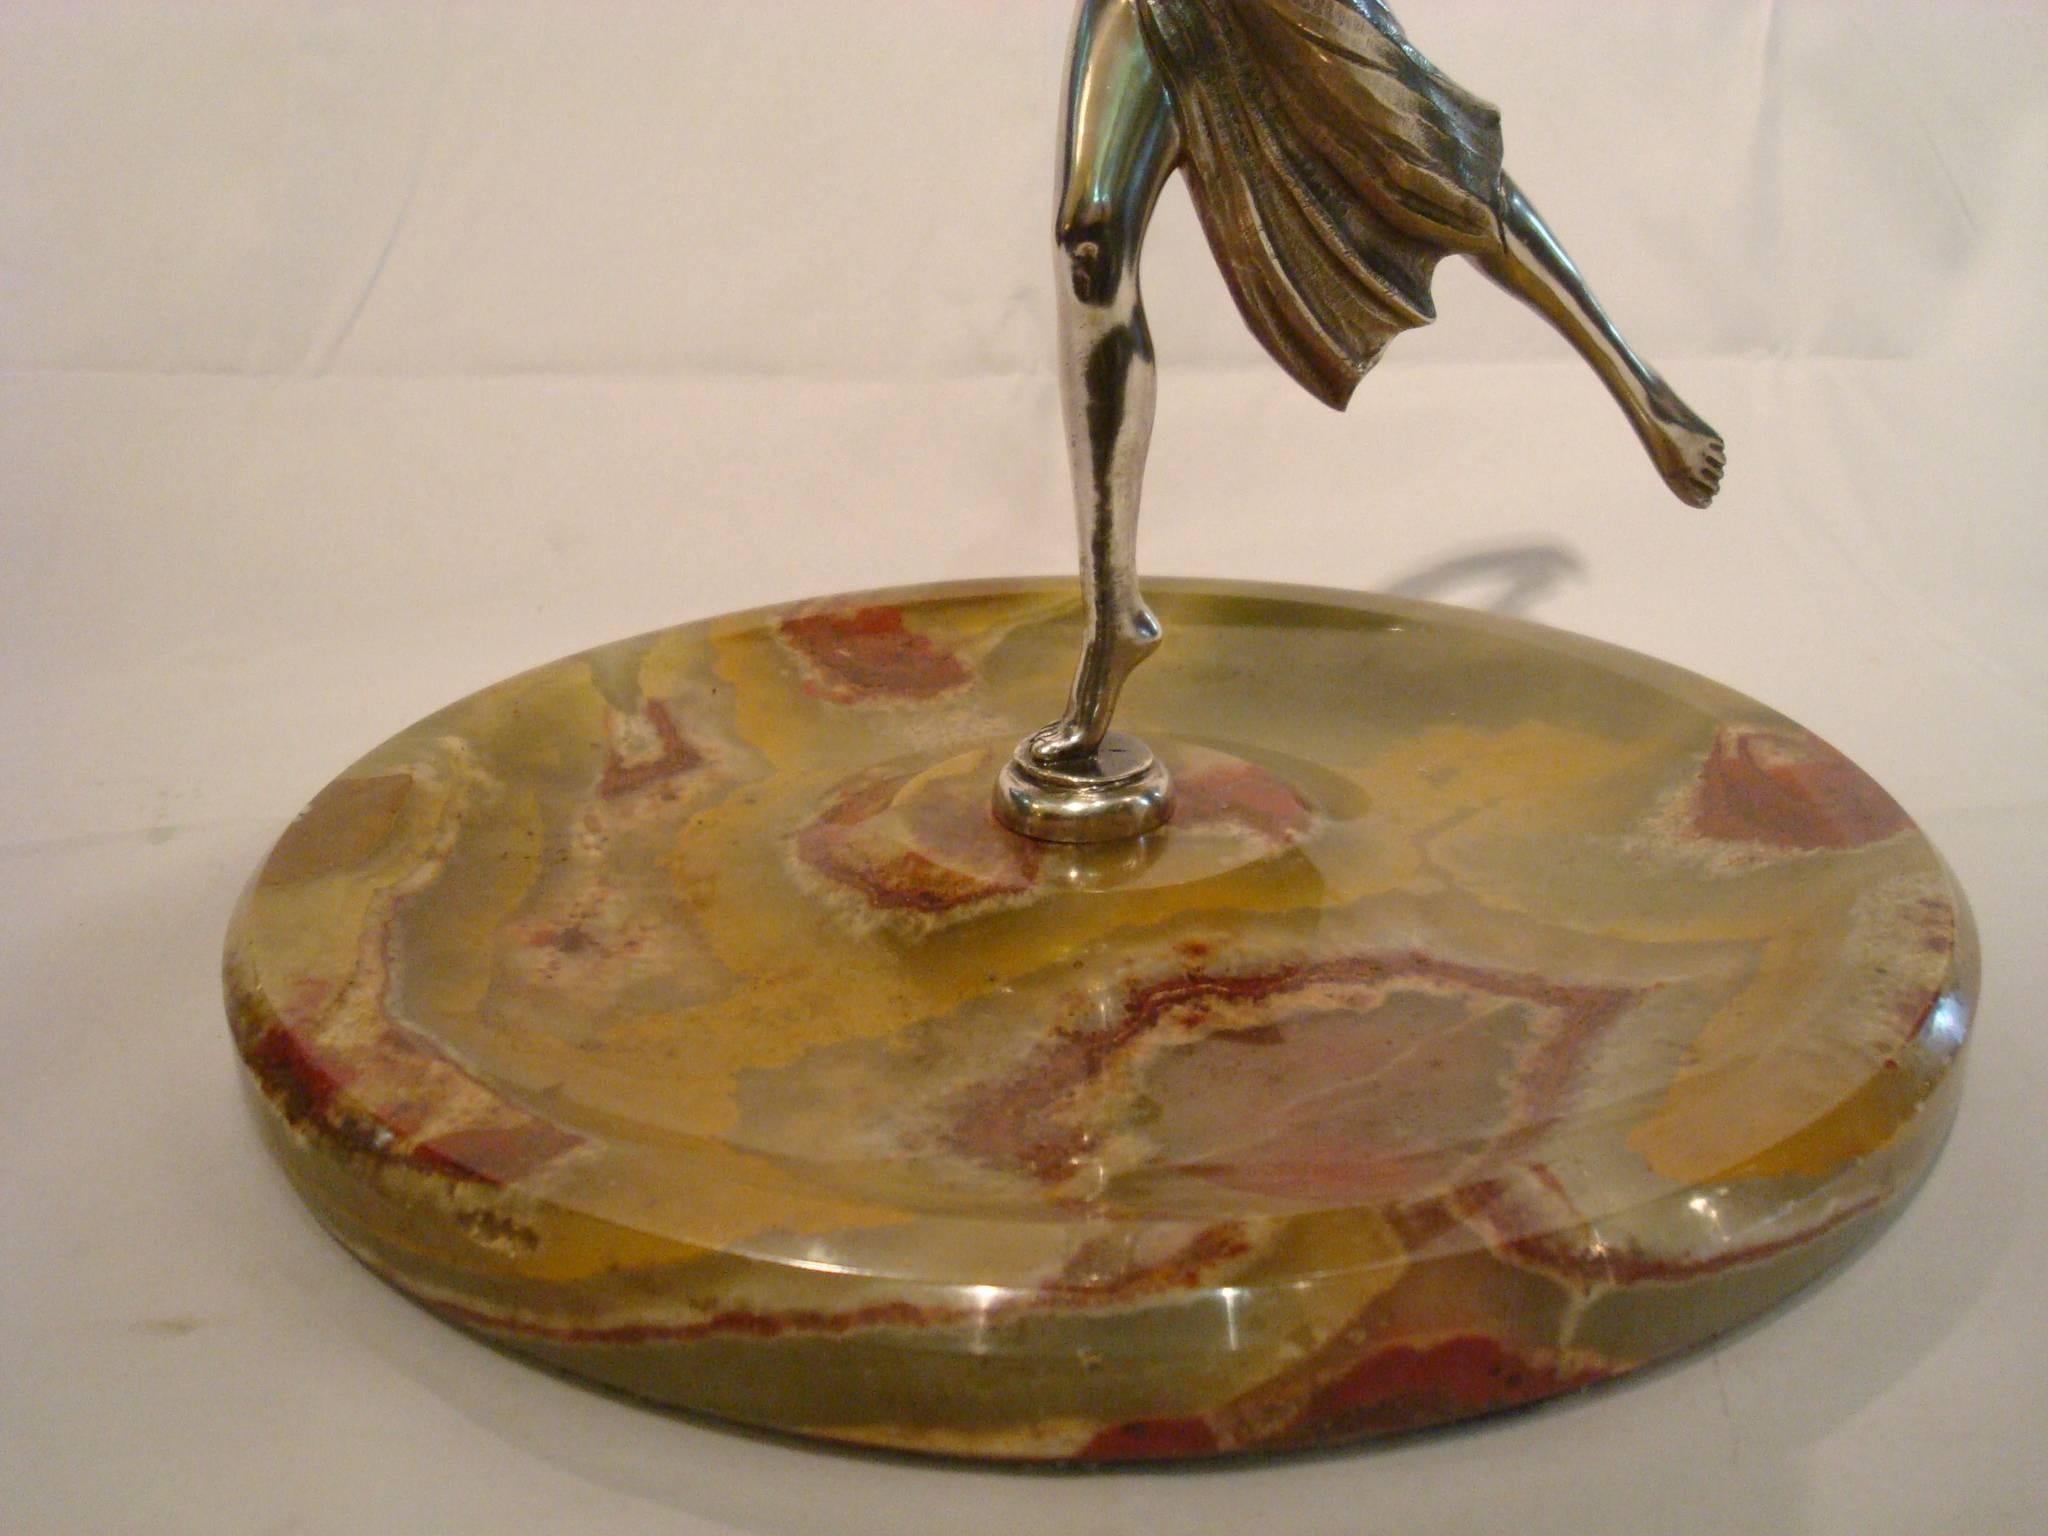 Silvered bronze sculpture of a women dancing. It has a marble tray or plated that can be use for jewelry, personal cards or keys. Made in France, 1930s.